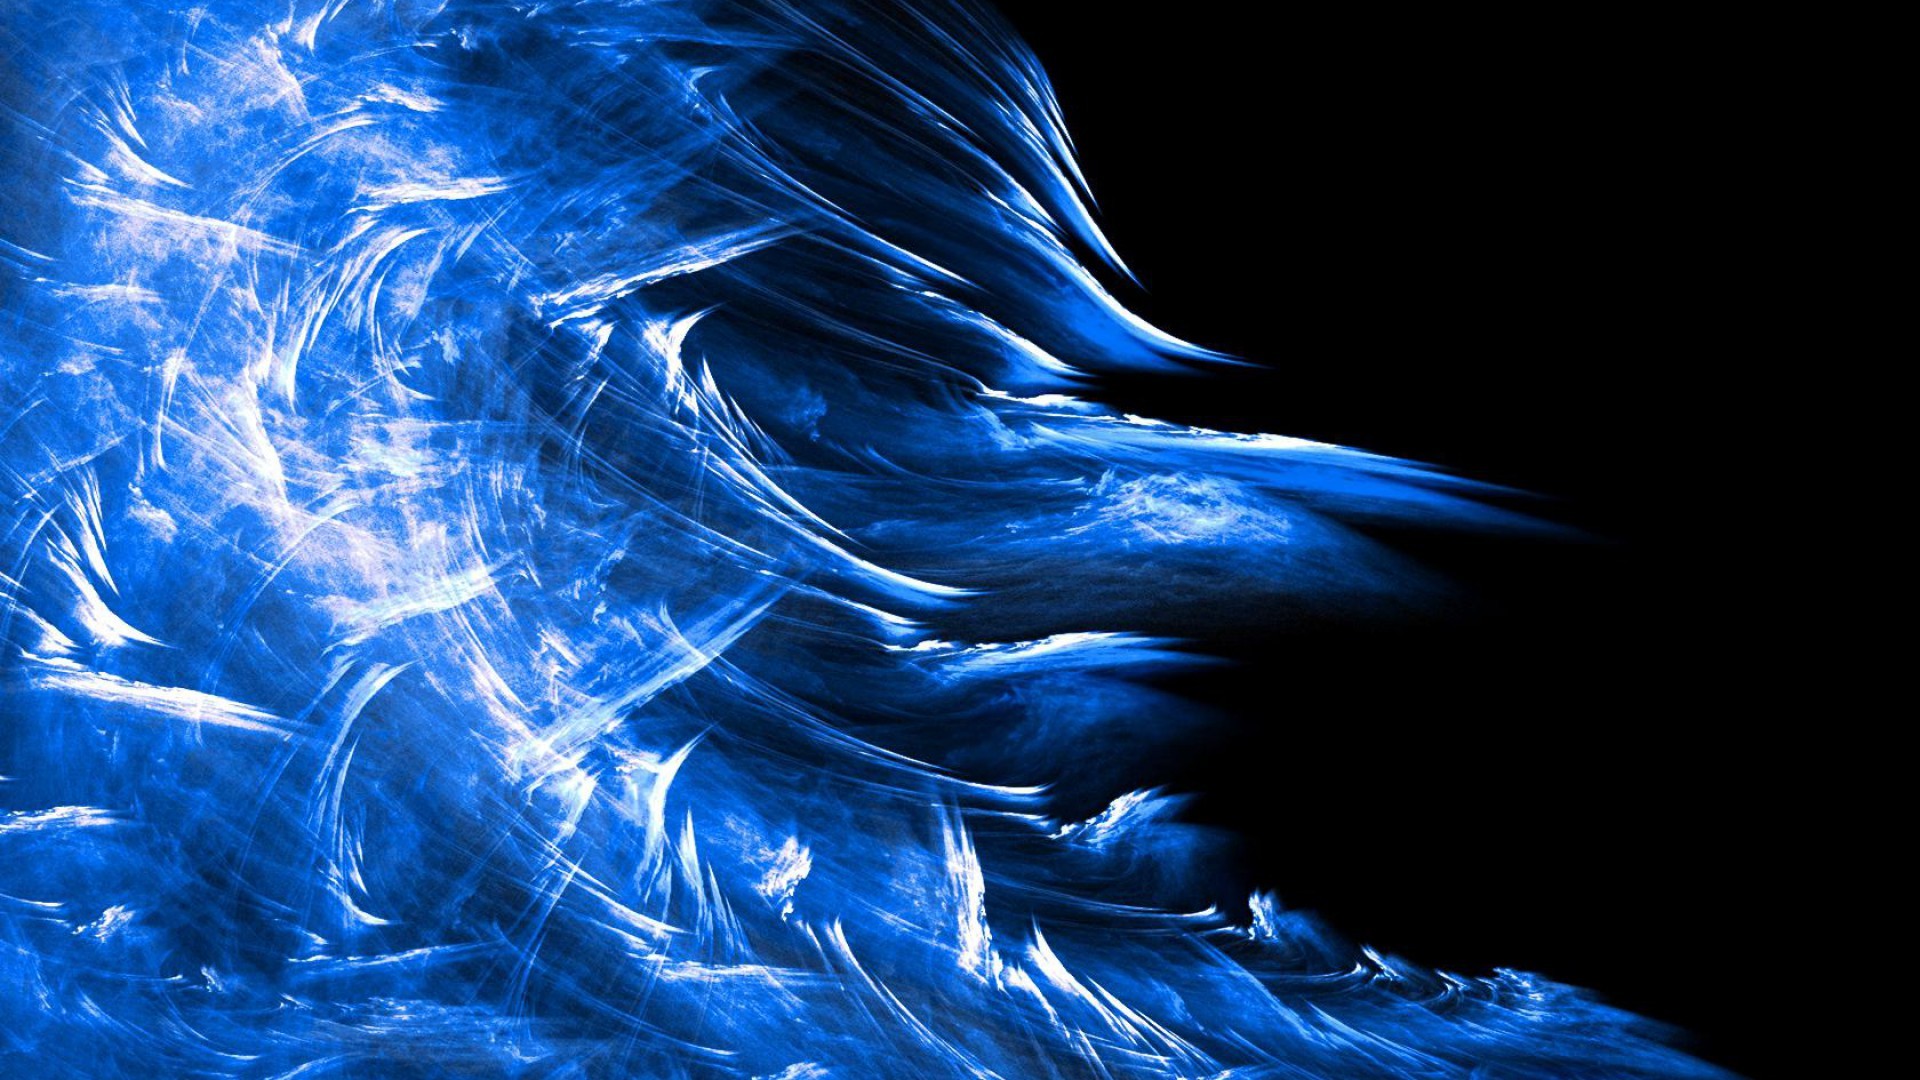 1920x1080, Abstract Wallpapers 1080p Wallpaper 
 Data - 1080p Cool Blue Backgrounds - HD Wallpaper 